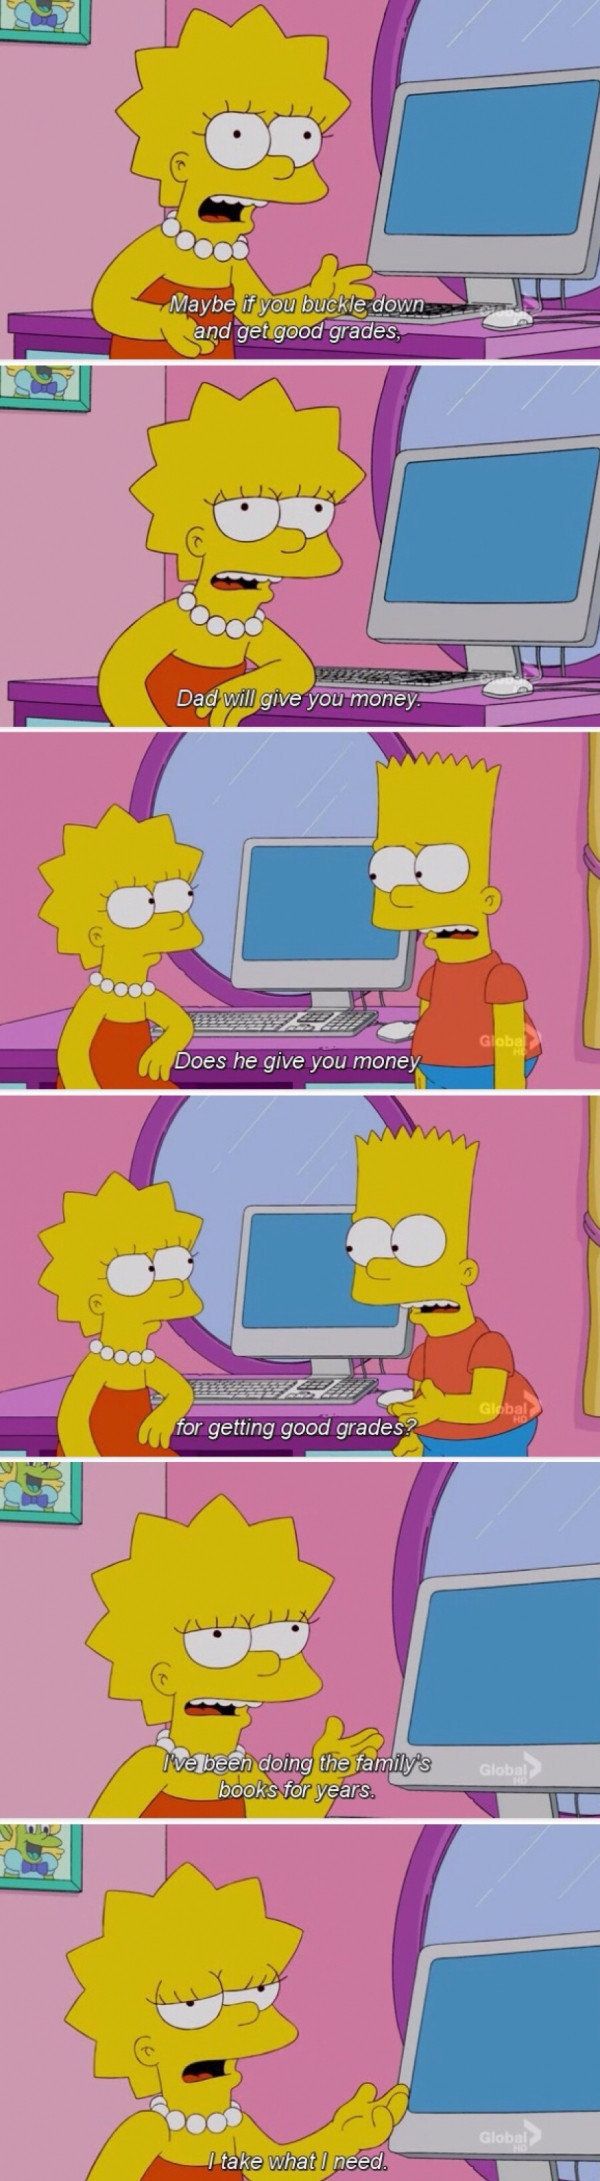 Insist Lisa Simpsons Best The Simpsons Images On Pinterest The Simpsons Homer